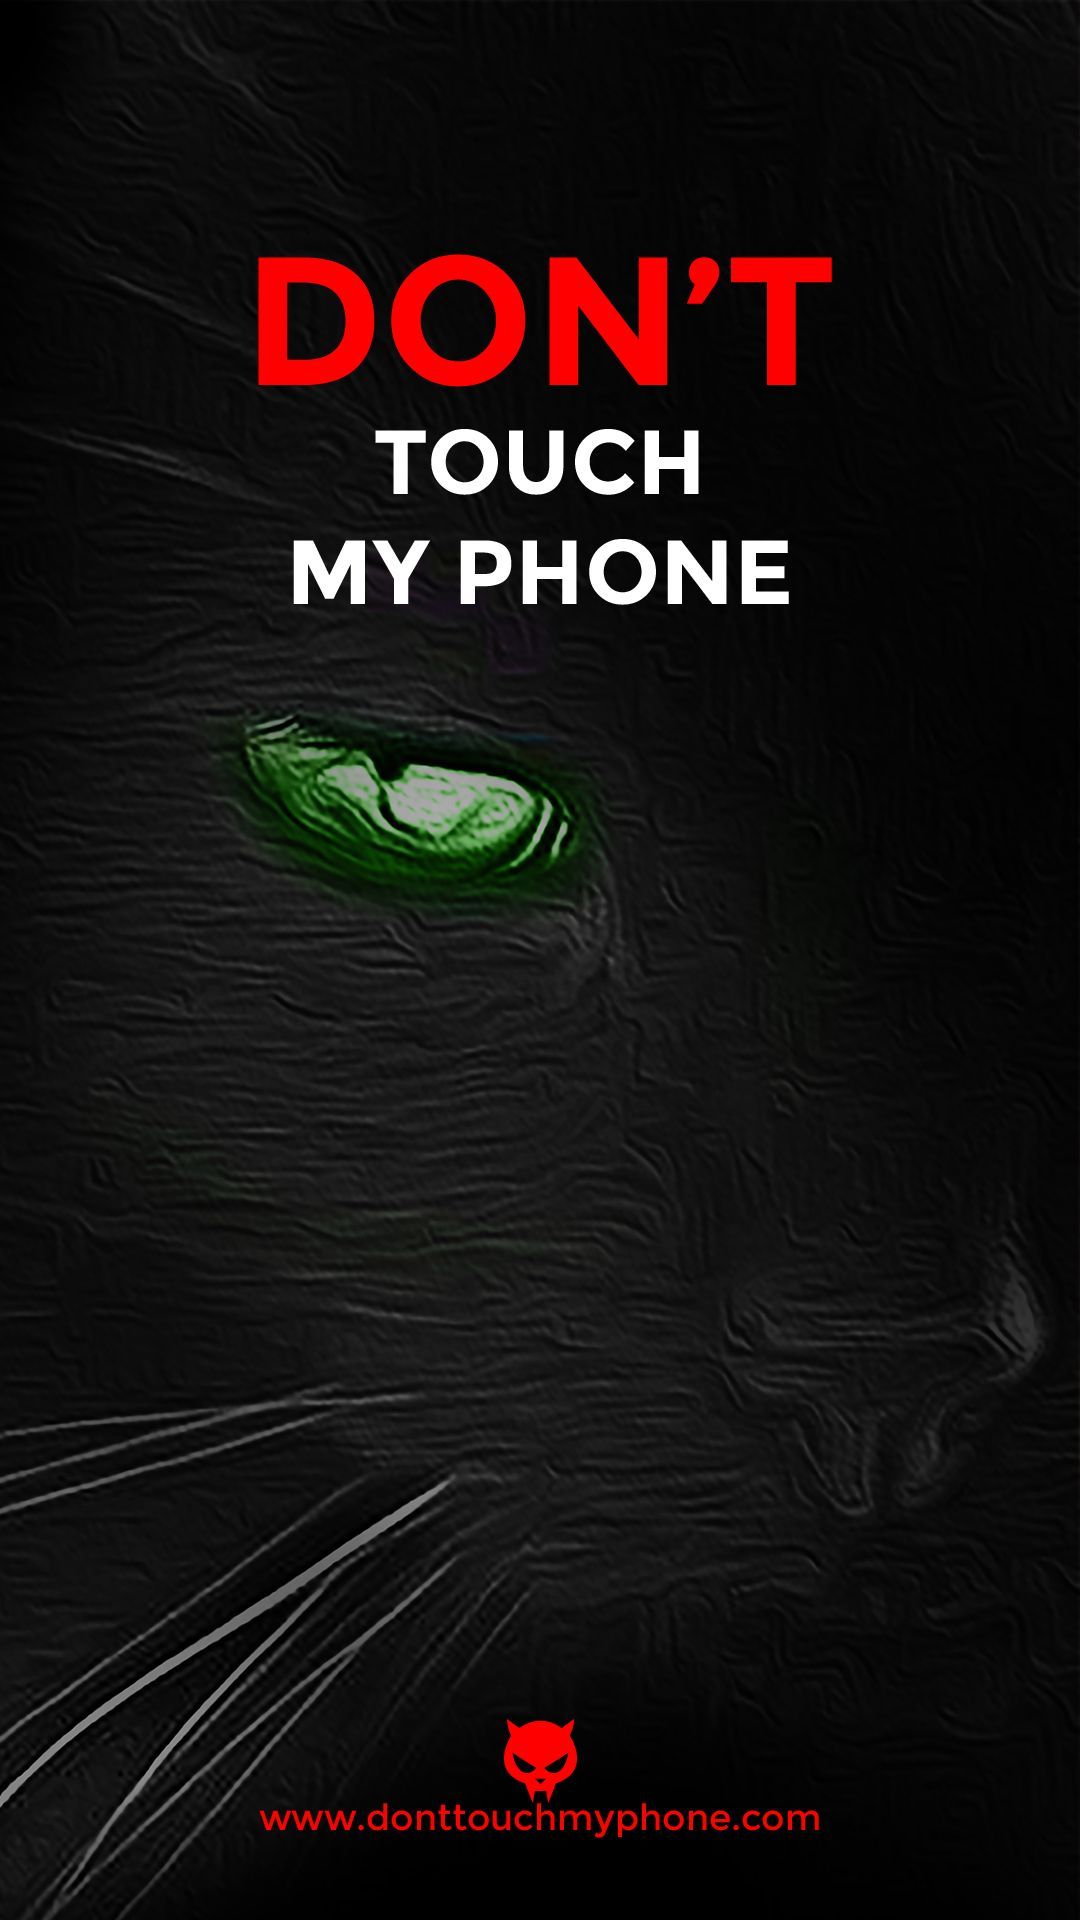 A black cat with green eyes and the words don't touch my phone - Don't touch my phone